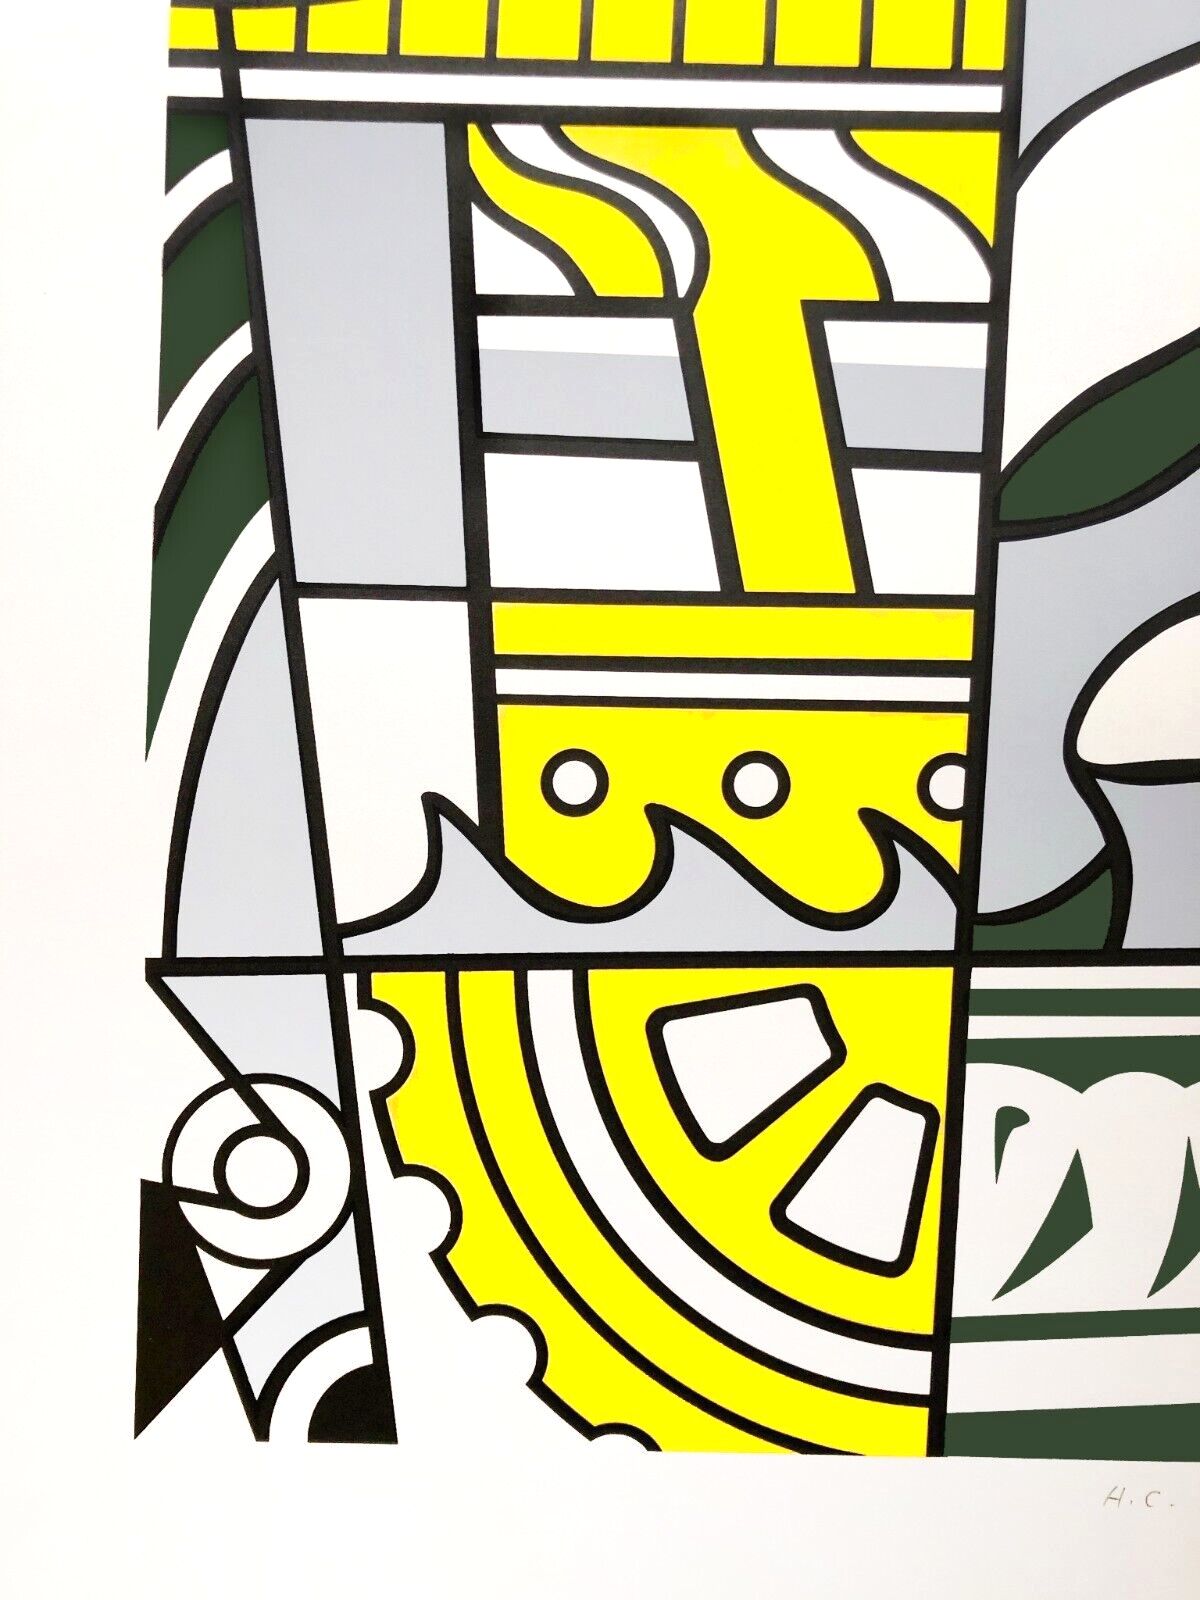 Detail Roy Lichtenstein Bicentennial Print (Corlett 136), 1975, 7 color lithograph and silkscreen in red, blue, yellow, green, gray, olive and black on white wove paper